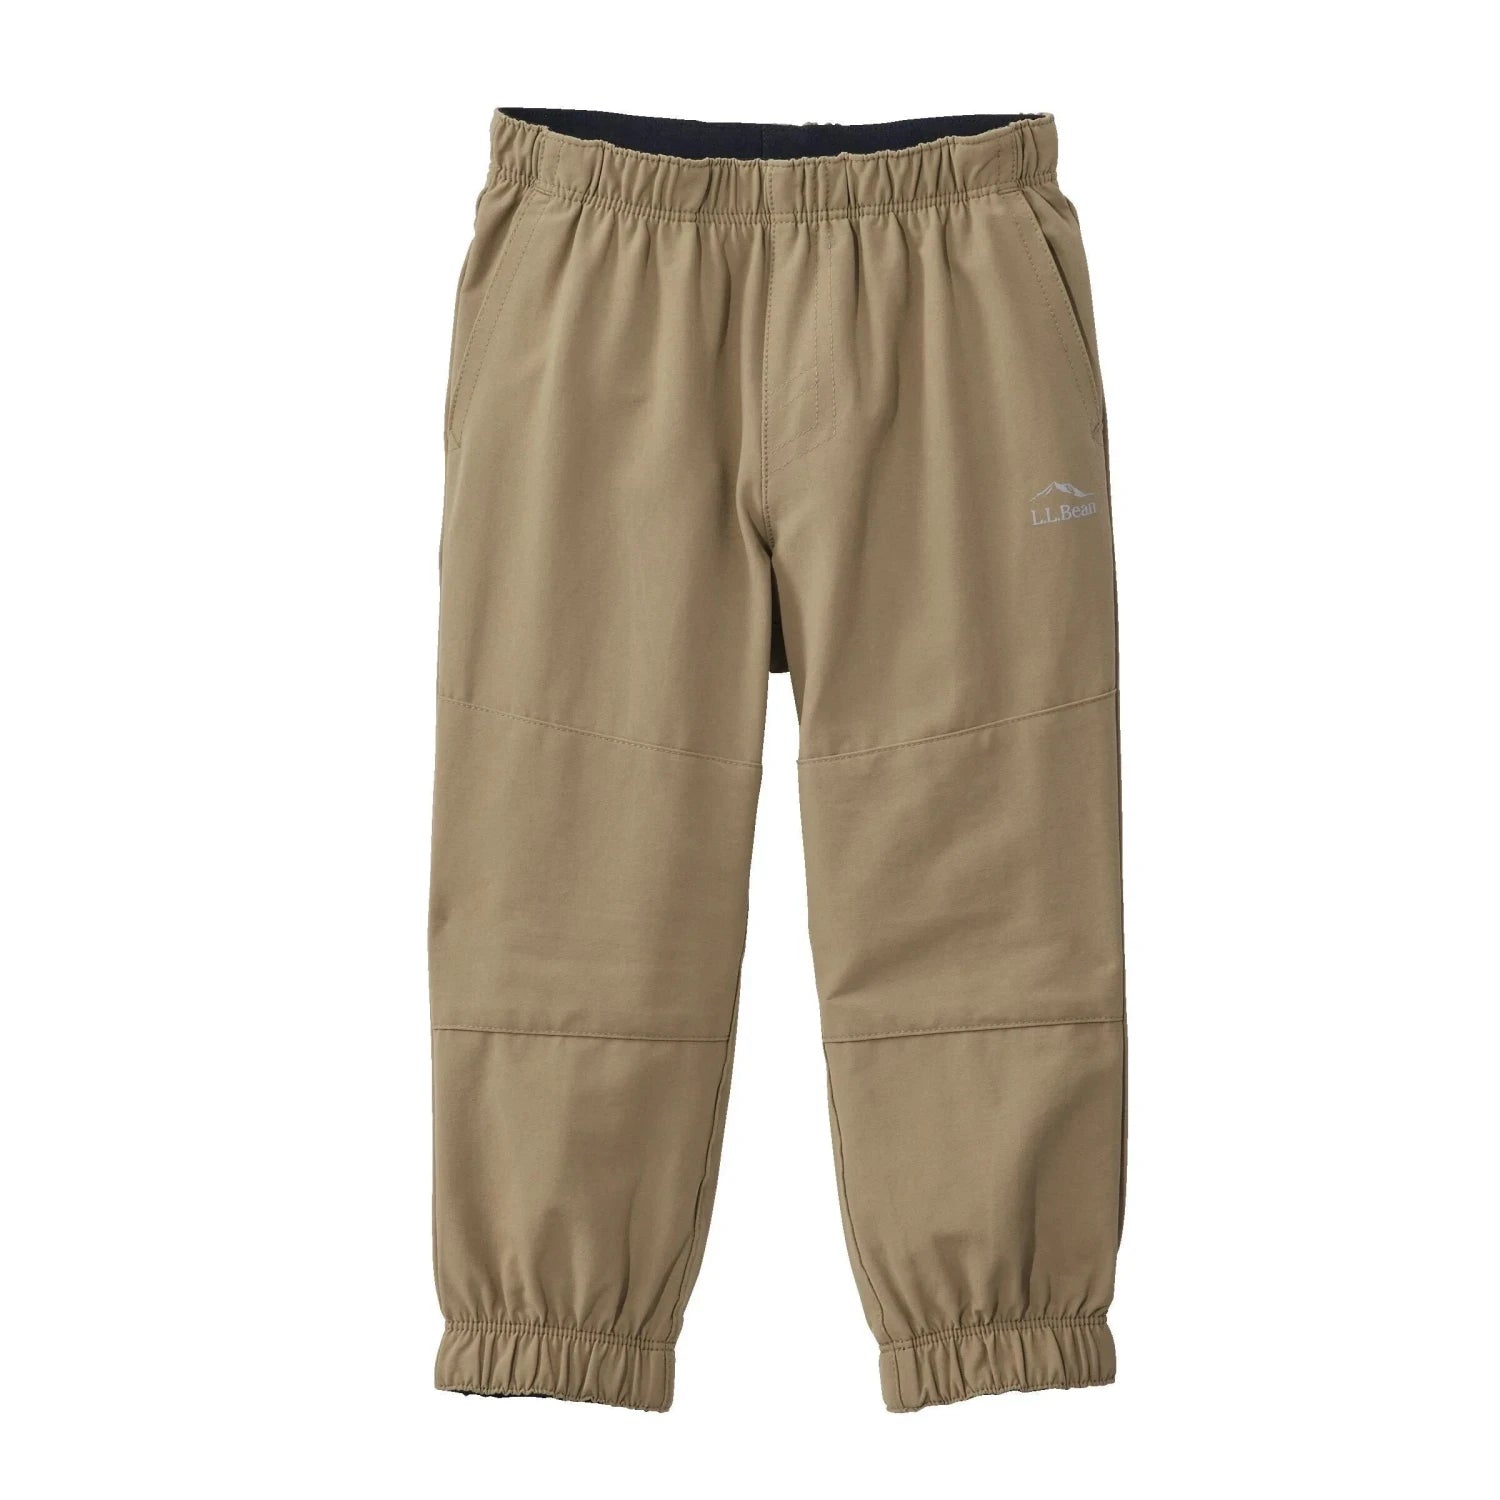 LL Bean Toddlers' Cresta Hiking Joggers shown in the Dark Driftwood color option, Front view.